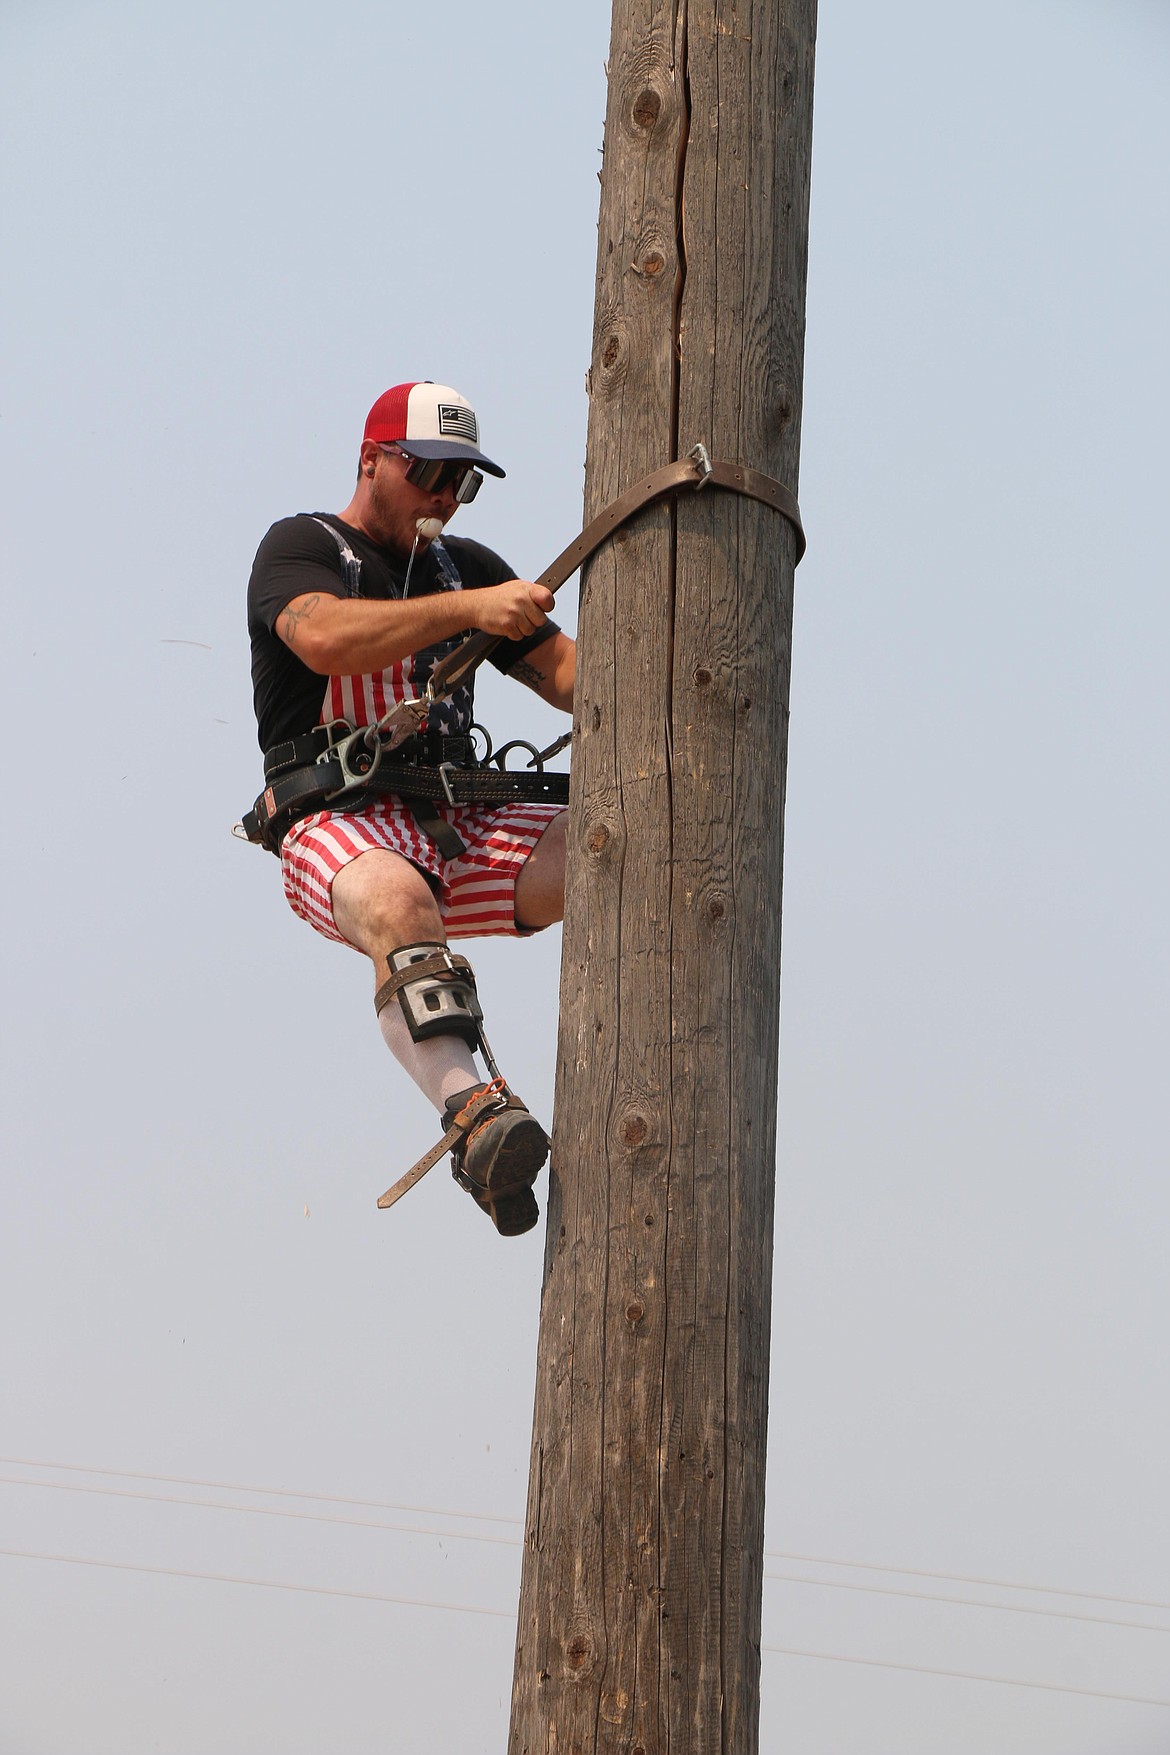 A competitor races down with the egg during Saturday's pole climbing contest at Timber Days.